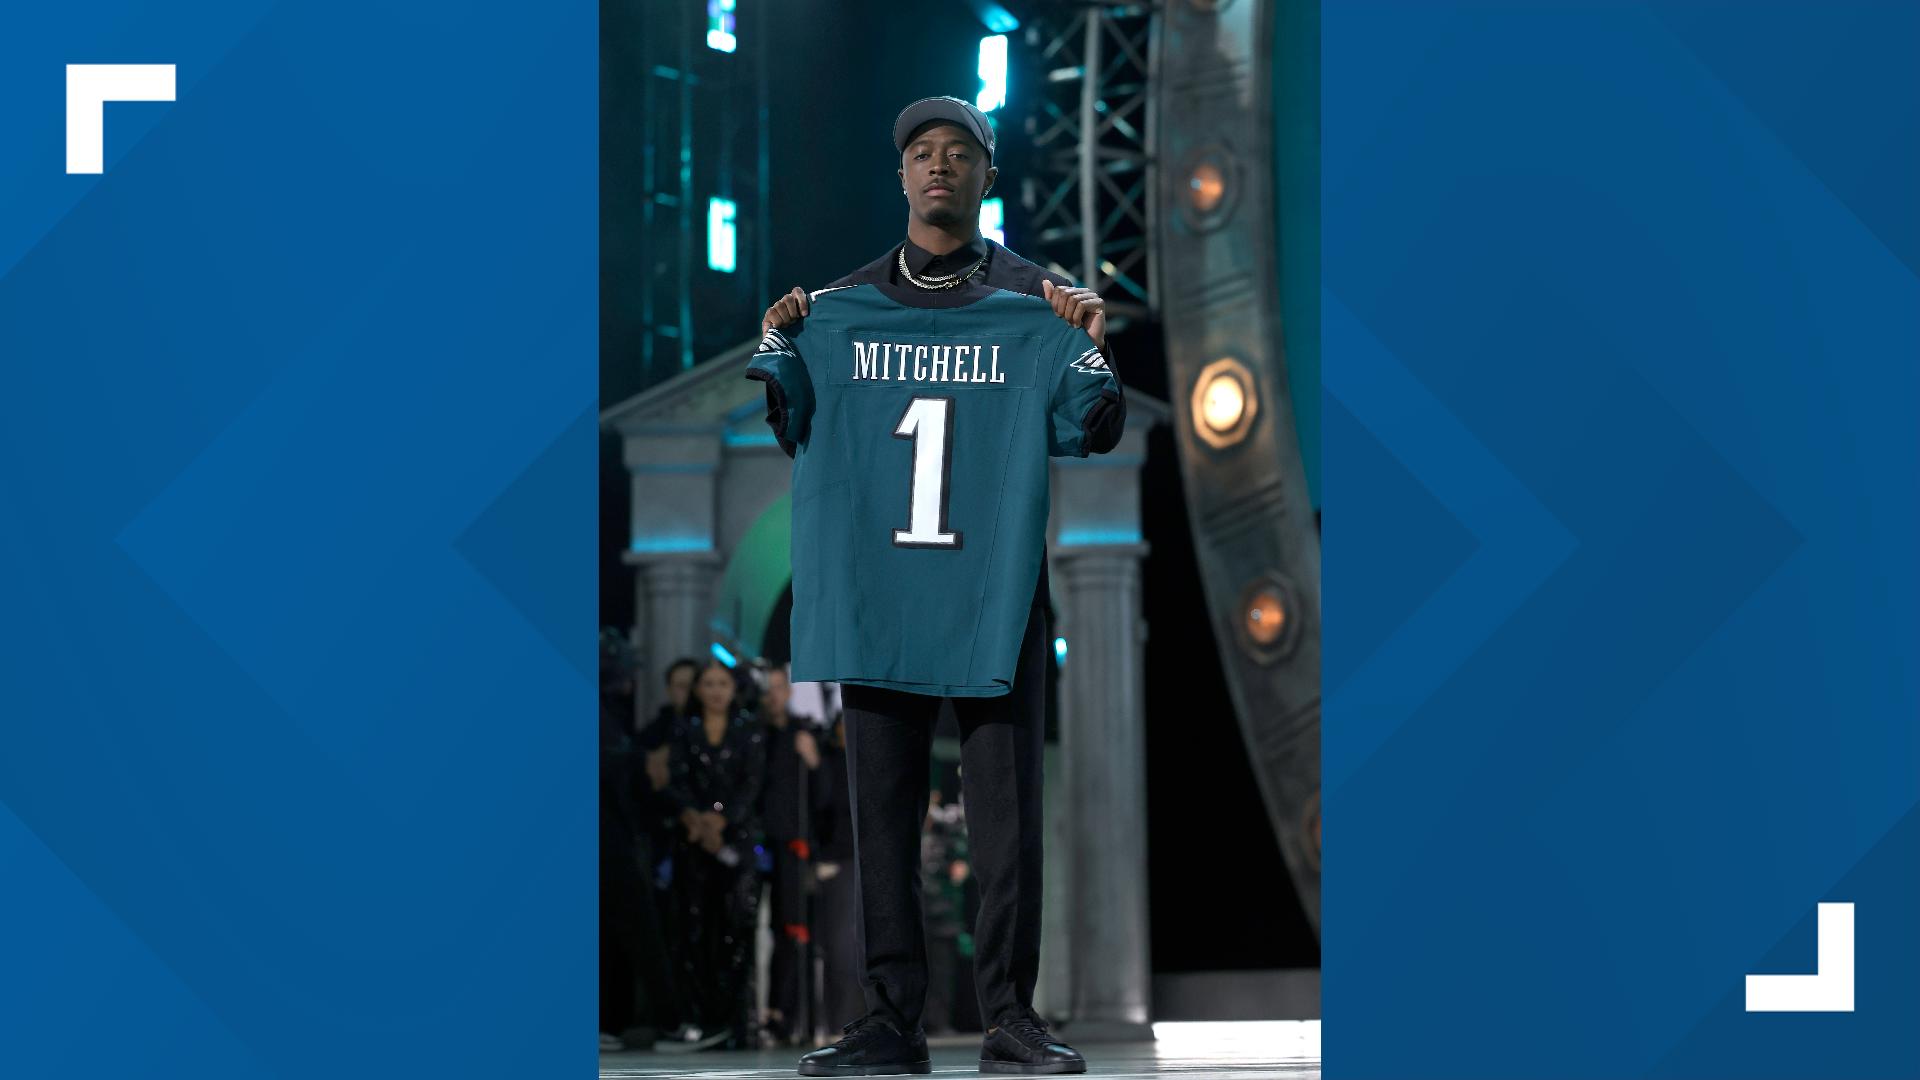 Quinyon Mitchell becomes the first Toledo Rocket since 1993 to be selected in the first round of the draft after being picked by the Philadelphia Eagles.